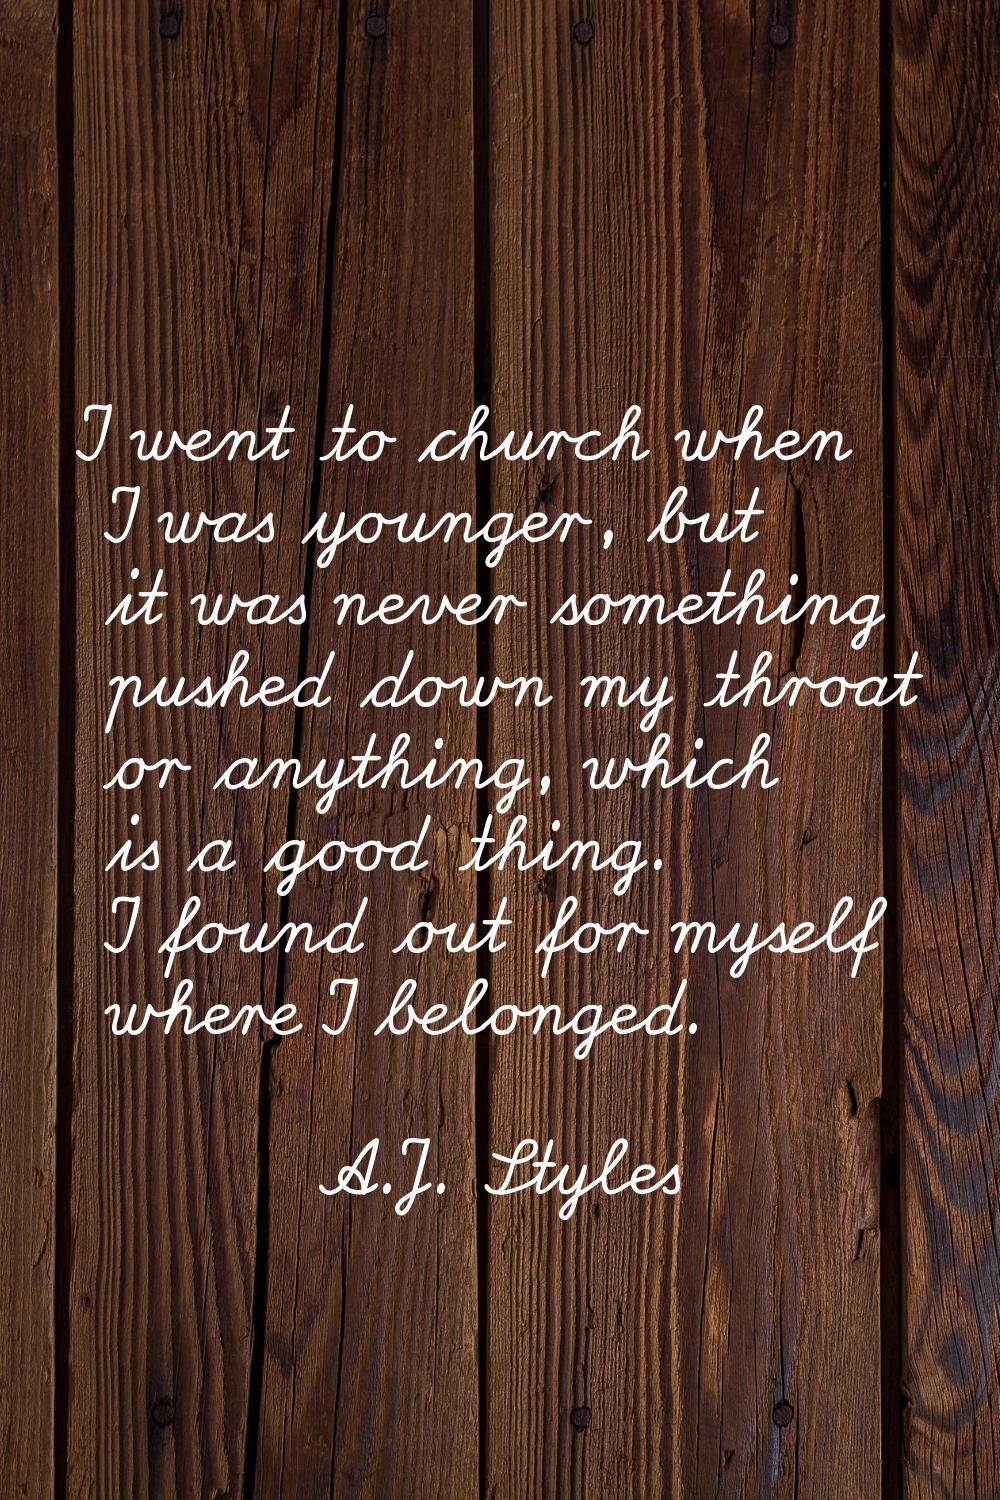 I went to church when I was younger, but it was never something pushed down my throat or anything, 